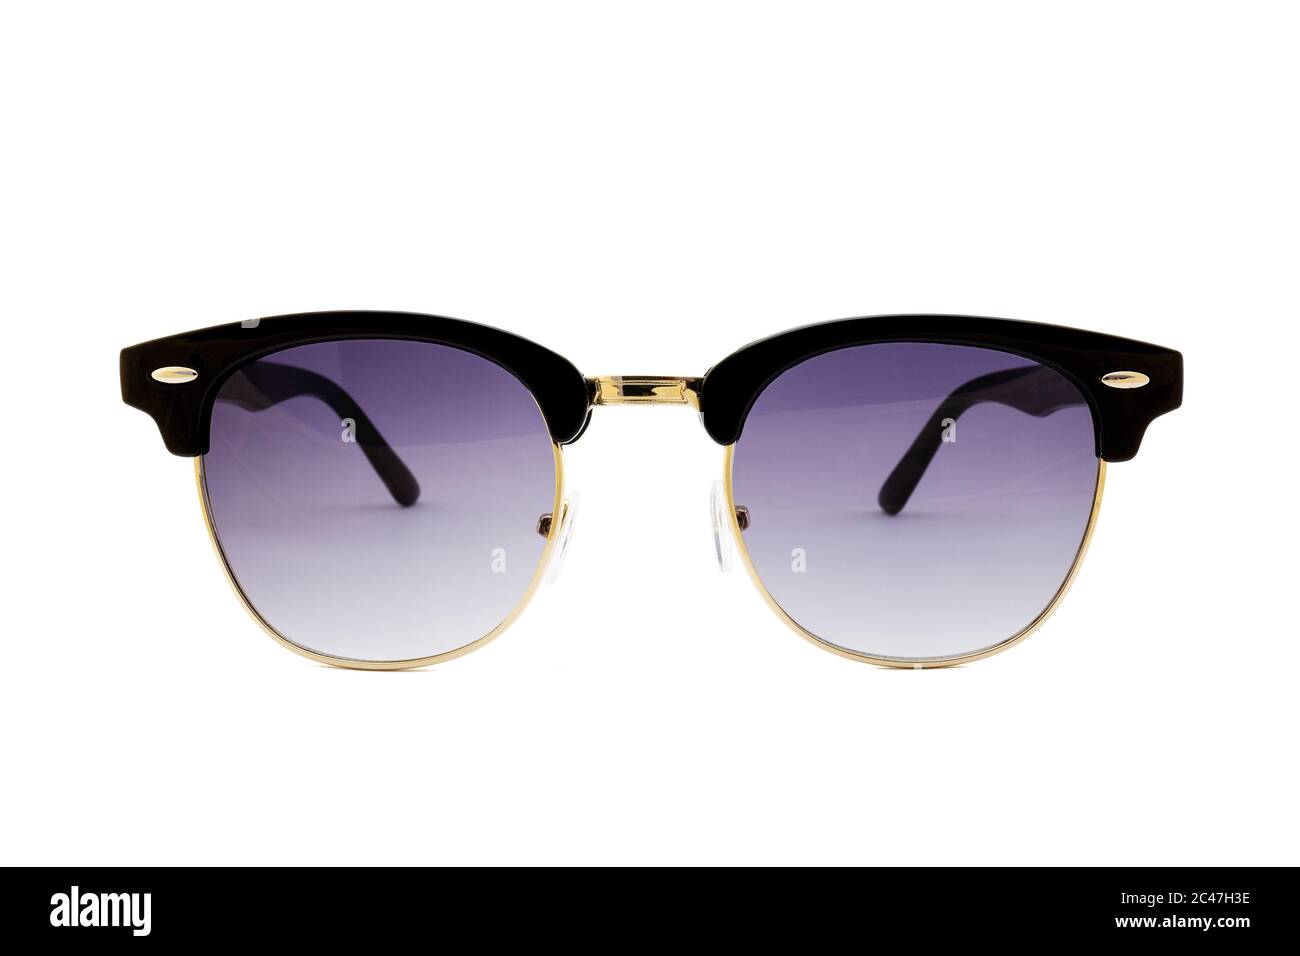 Black Thick Frames Flat Top Clubmaster Sunglasses With Round Bottom Golden  Frames And Clear Dark Blue Lenses Isolated On White Rear View Stock Photo  Alamy 